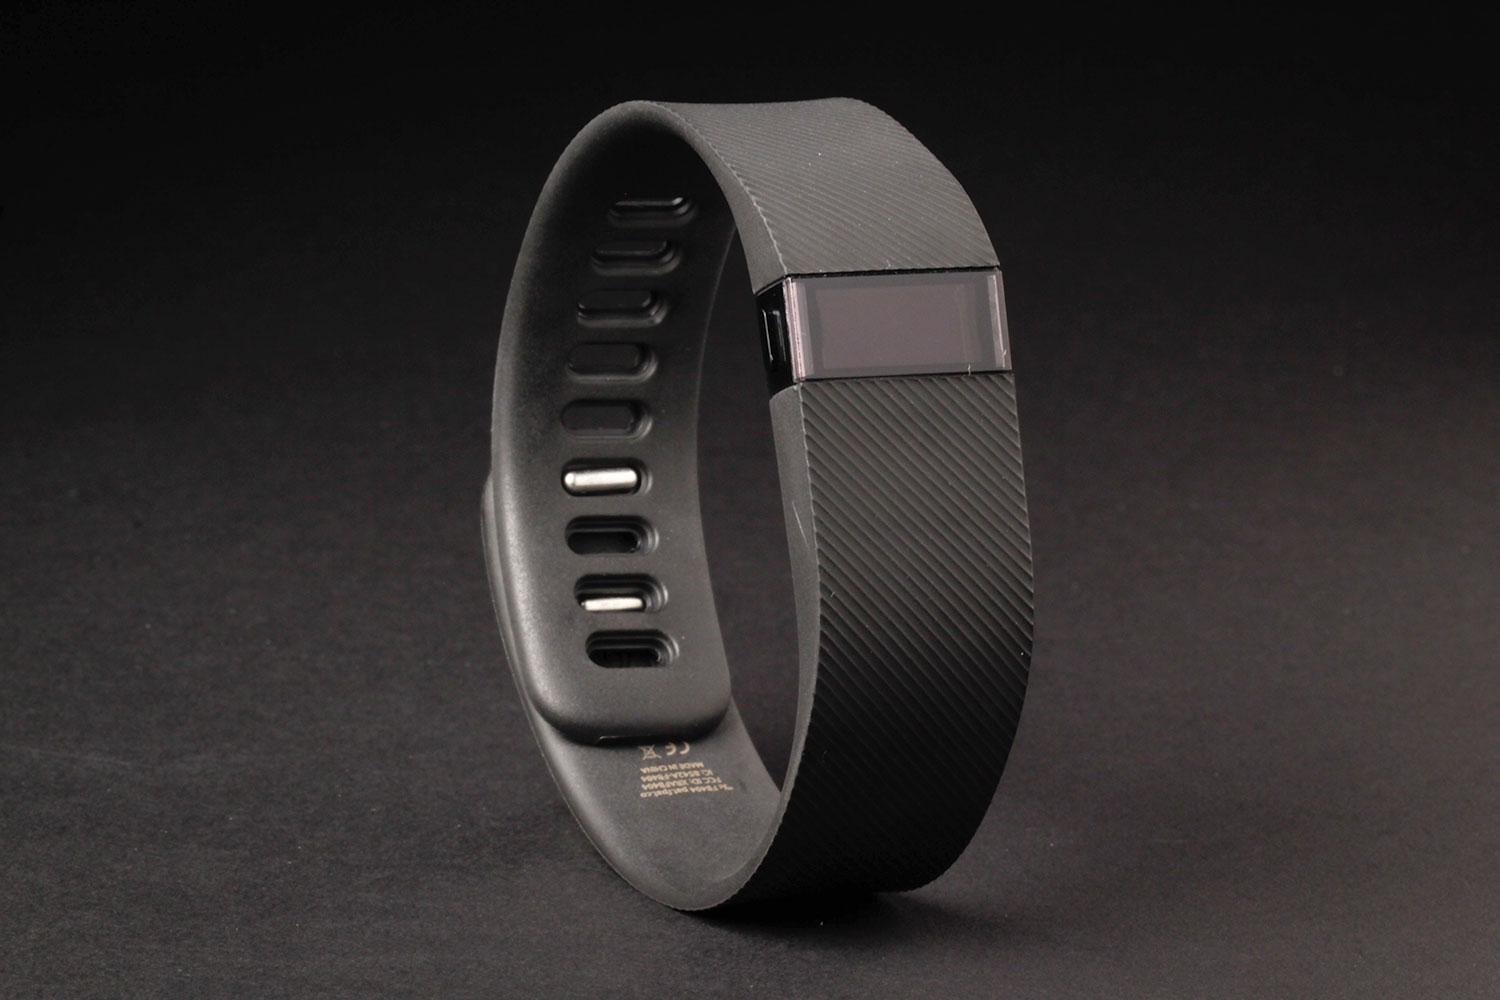 Fitbit Charge and Surge Cause Rashes on Some Wrists | Digital Trends